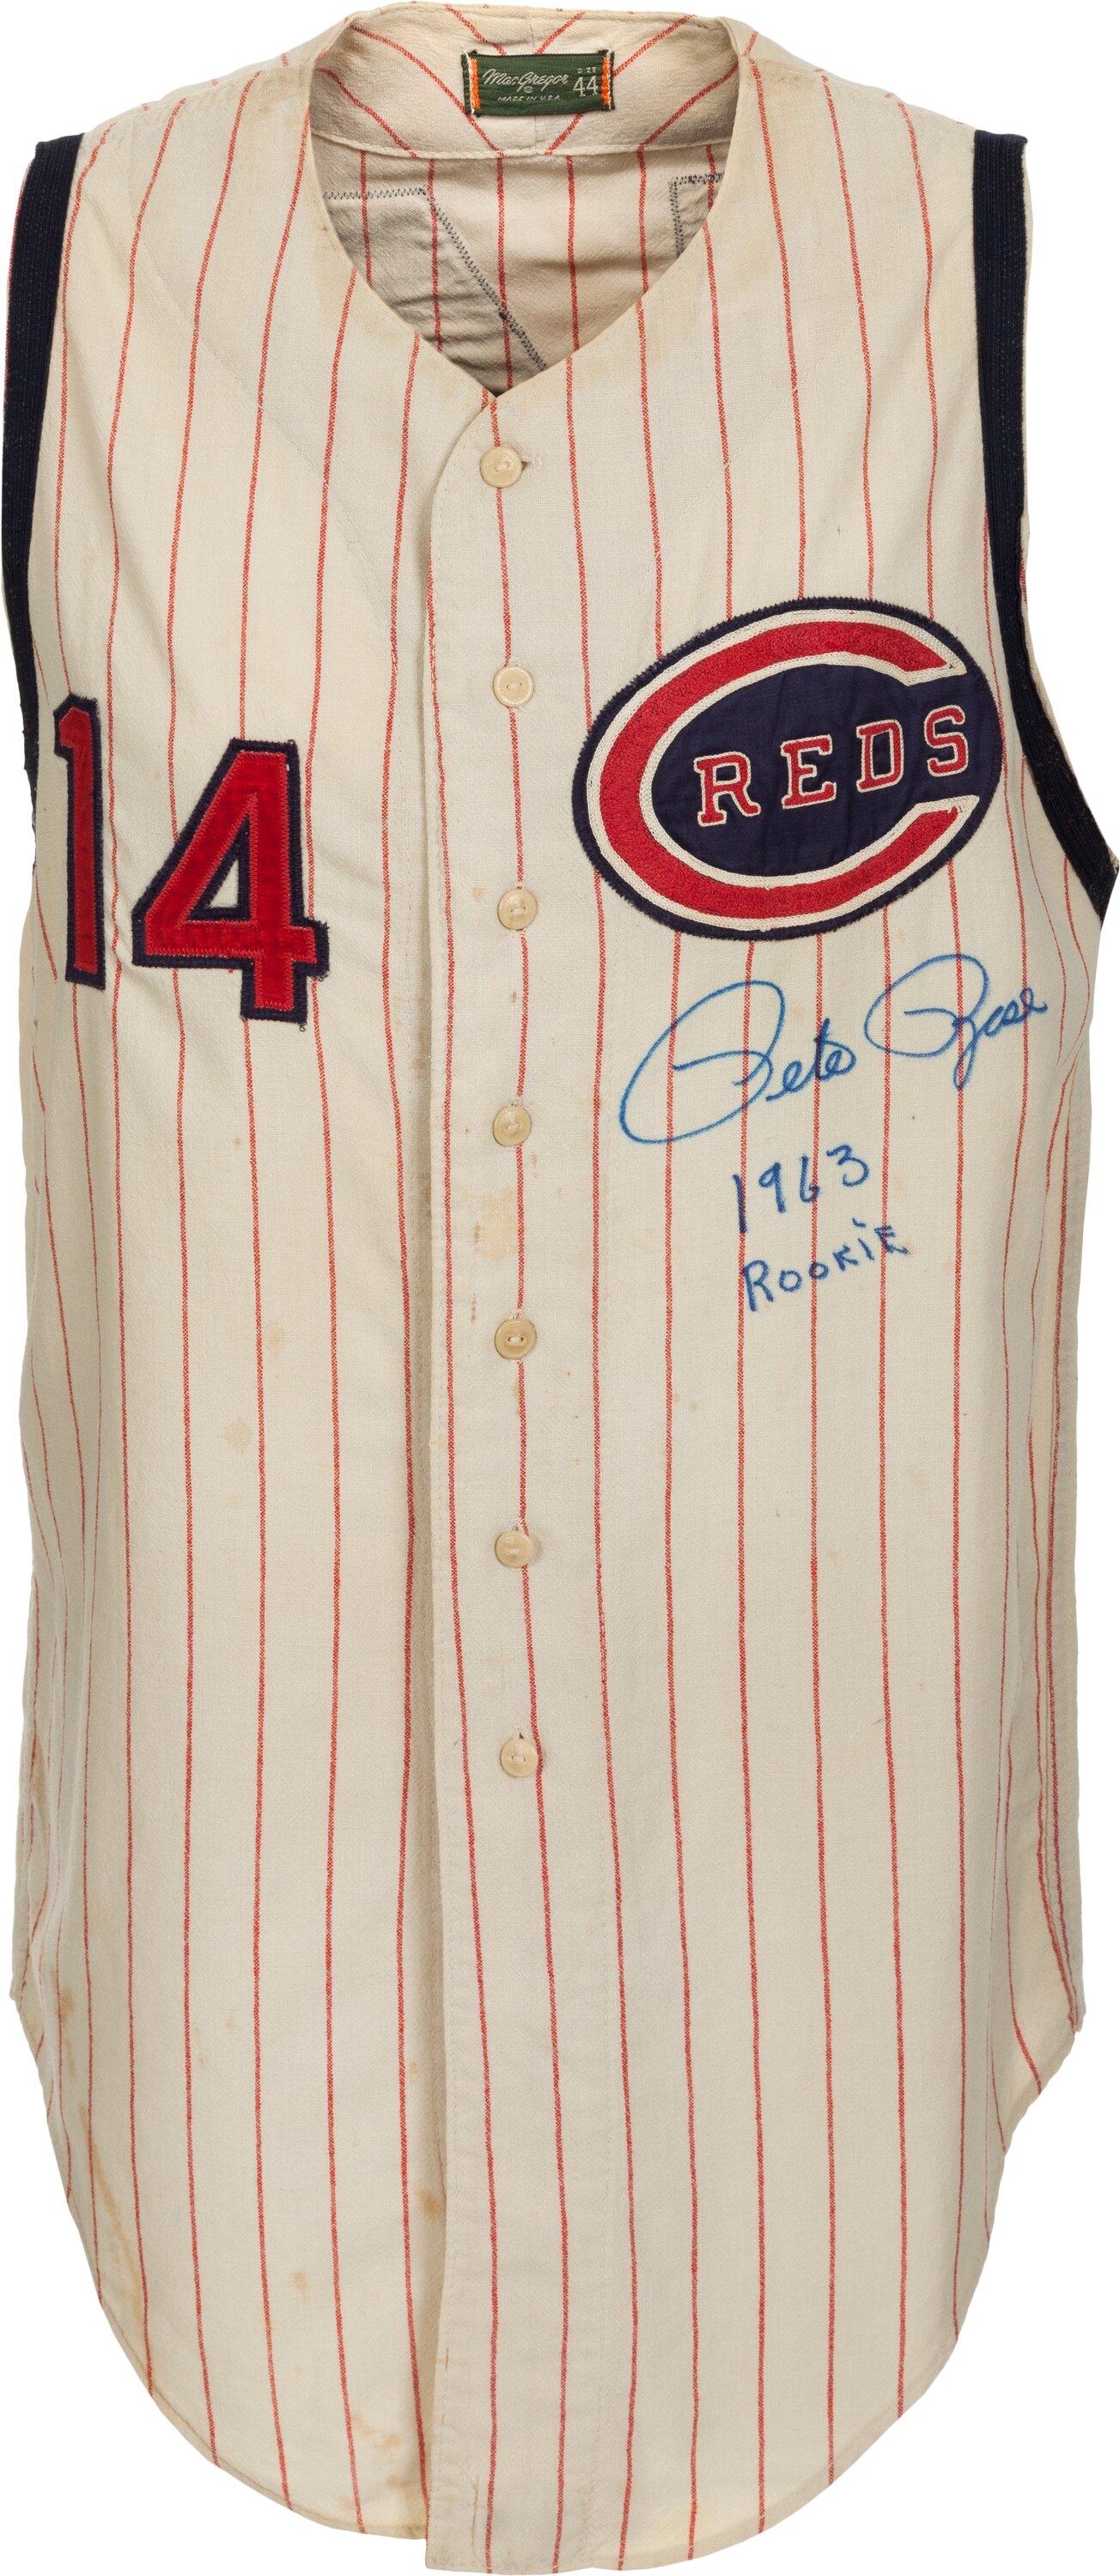 National League Cincinnati Reds #14 Pete Rose Red 2015 All-Star Game Player  Jersey on sale,for Cheap,wholesale from China